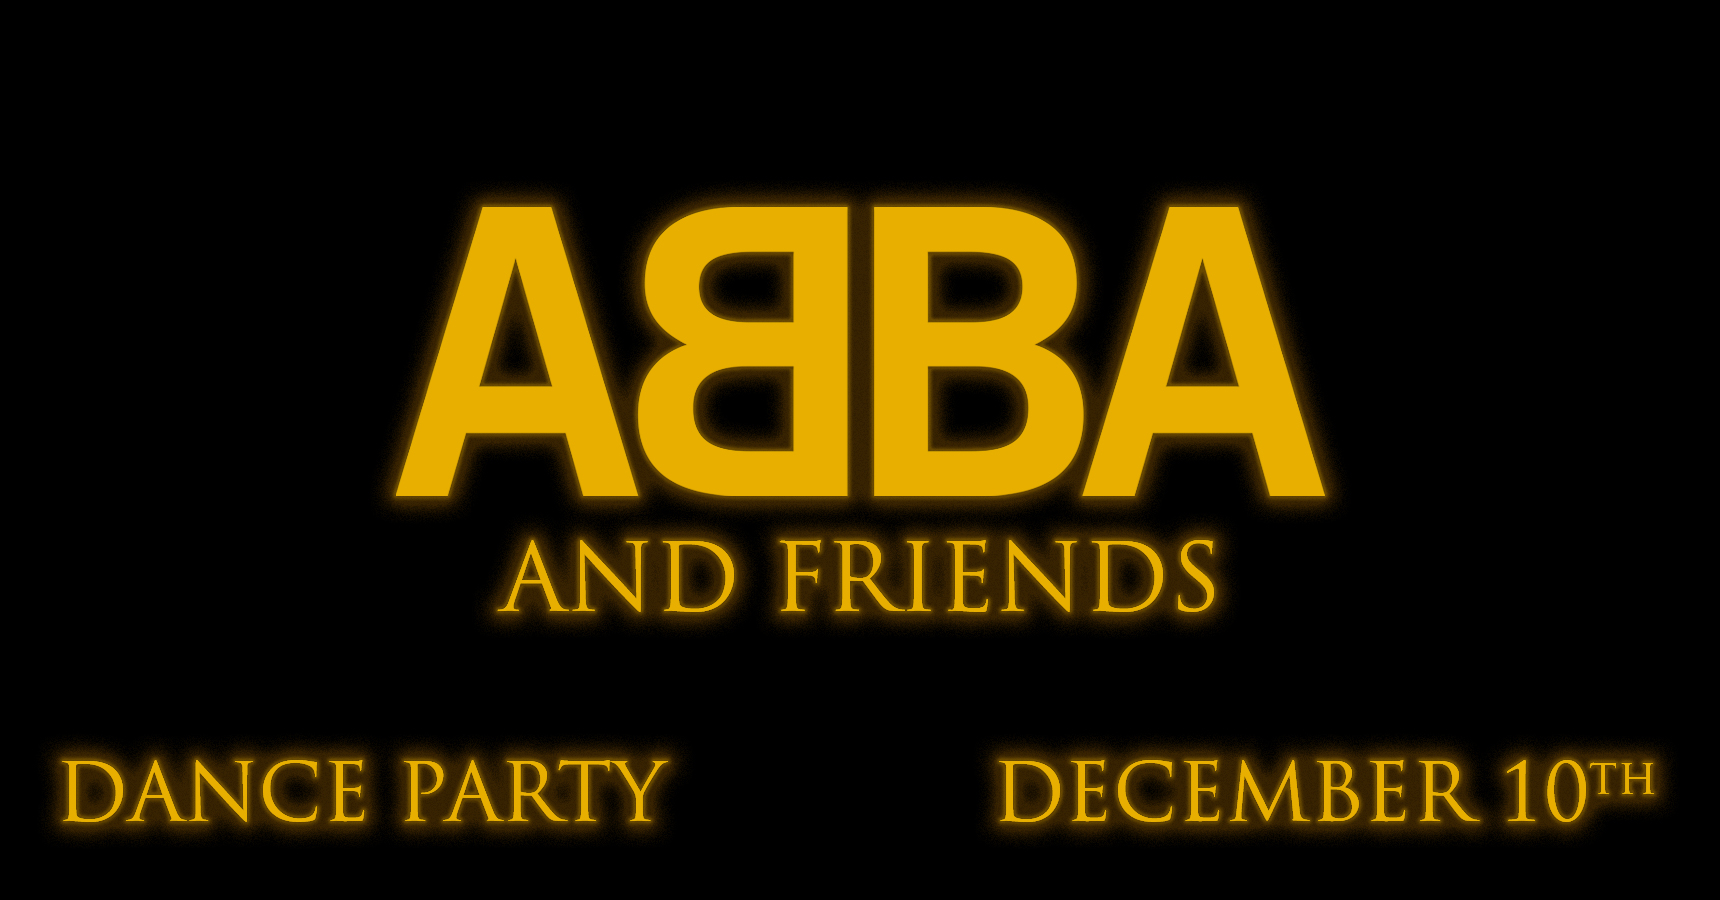 ABBA and Friends Dance Party